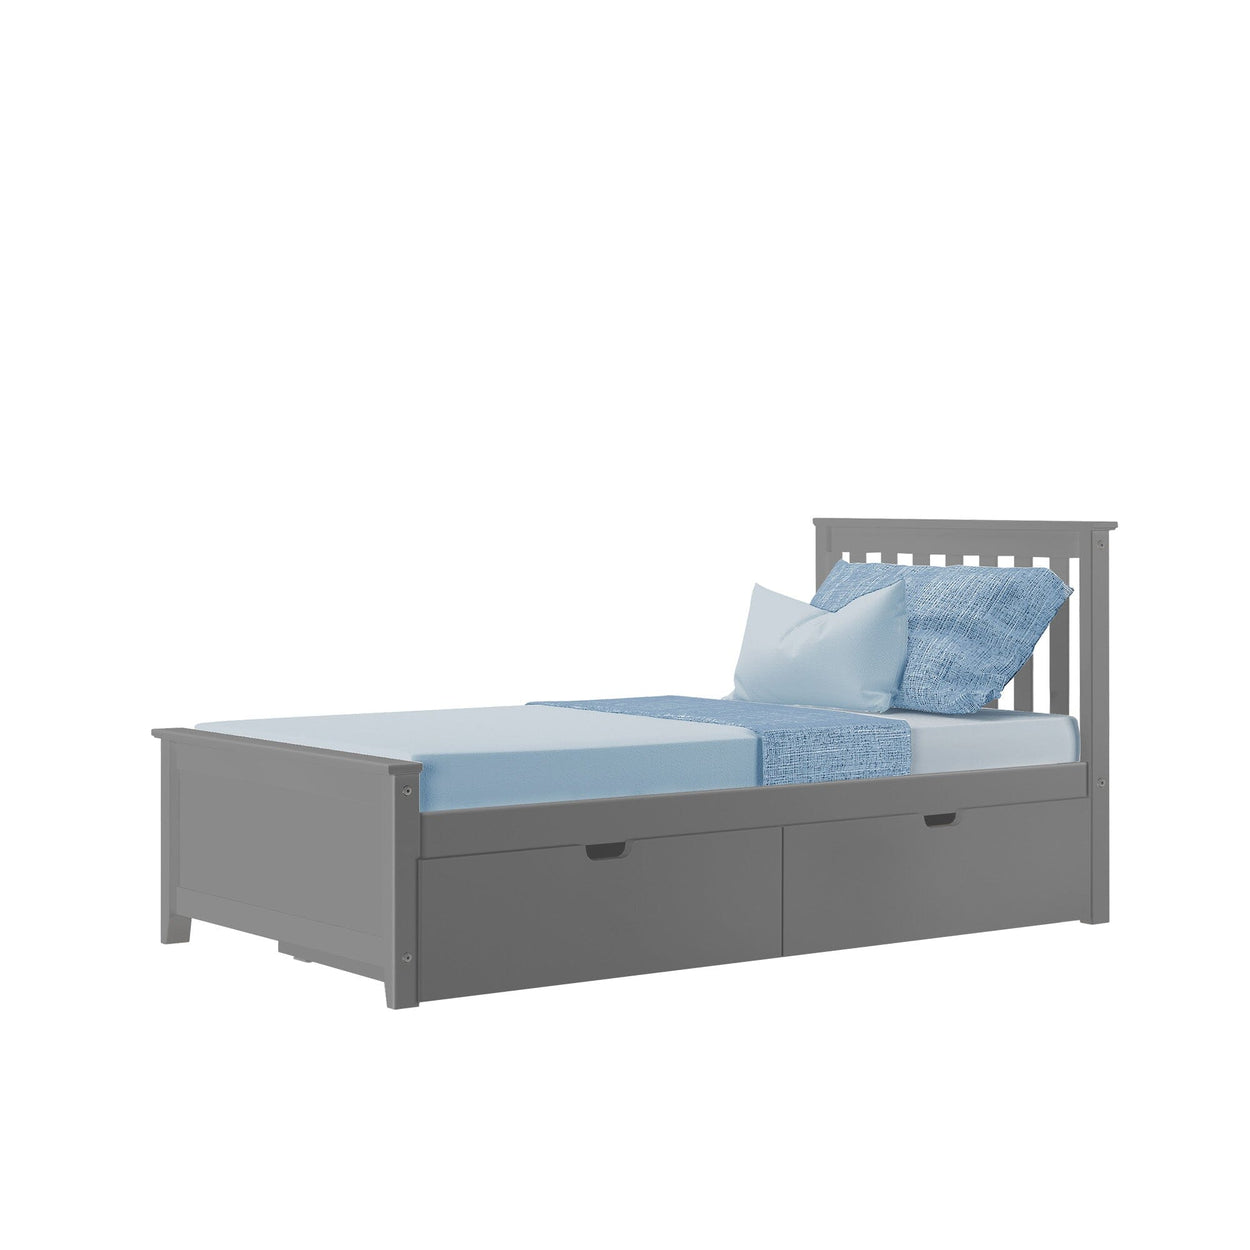 187210-121 : Kids Beds Twin-Size Platform Bed with Underbed Storage Drawers, Grey